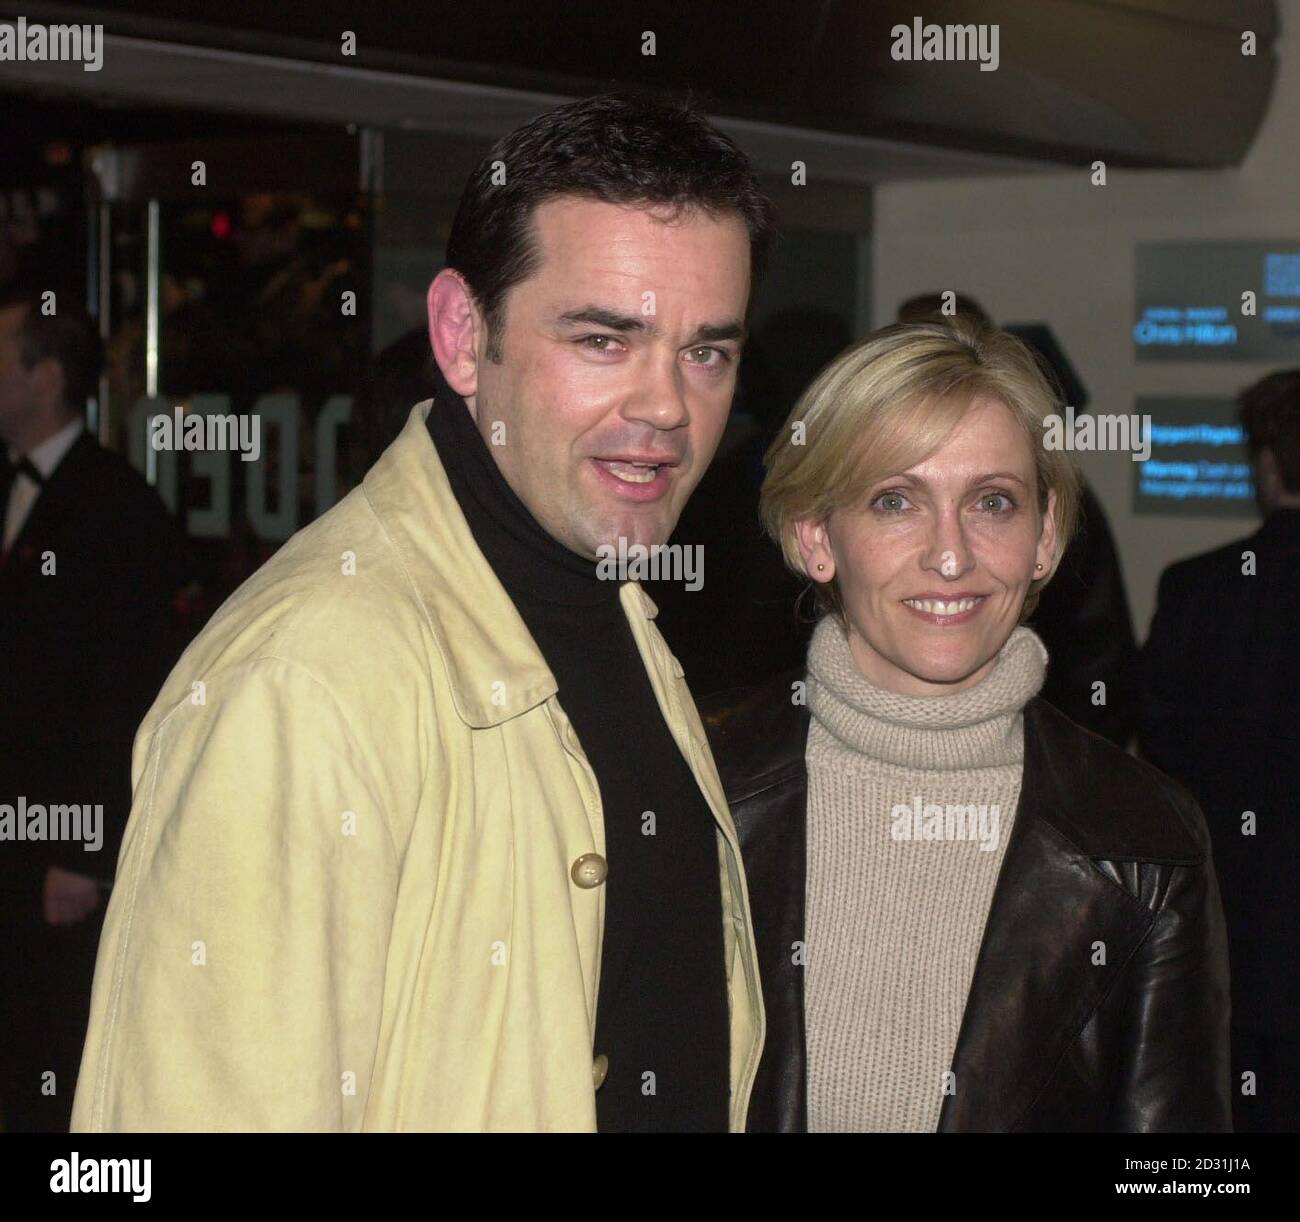 Ex England rugby player Will Carling and his wife Lisa arrive for the premiere of the film Miss Congeniality, at the Odeon cinema, Leicester Square, London. Stock Photo